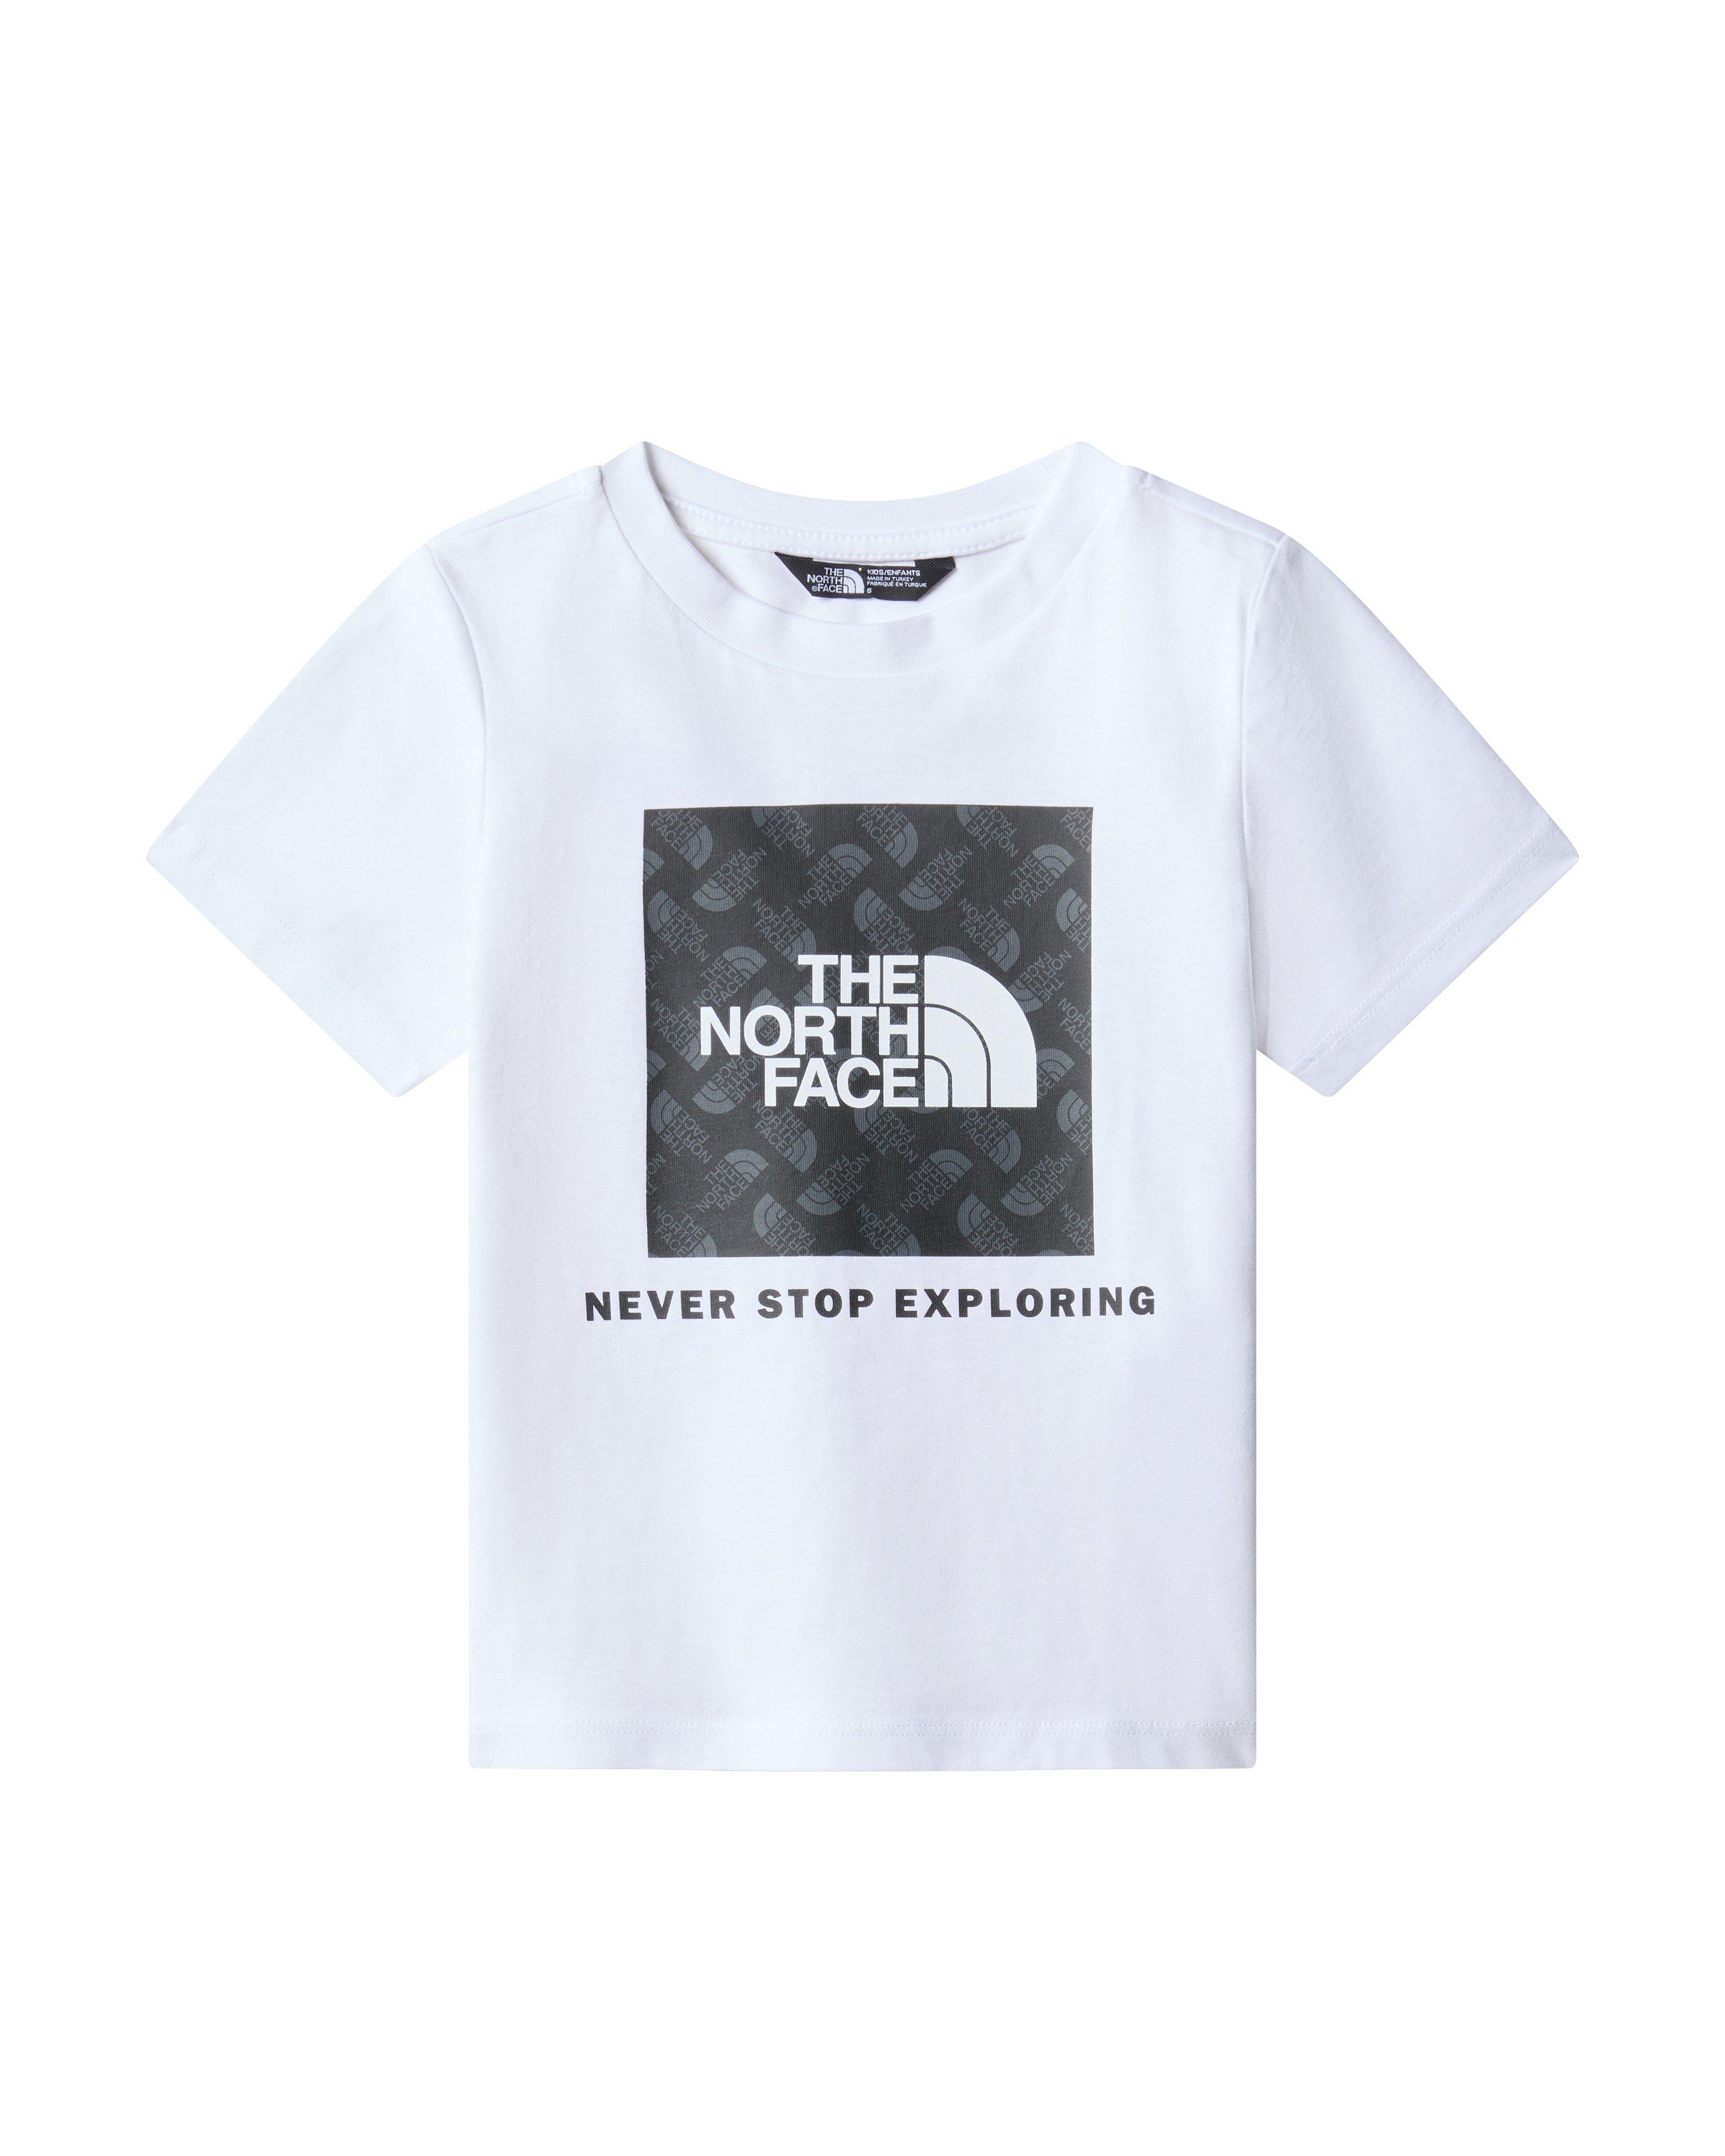 The North Face Kids Lifestyle Graphic T-shirt -  White